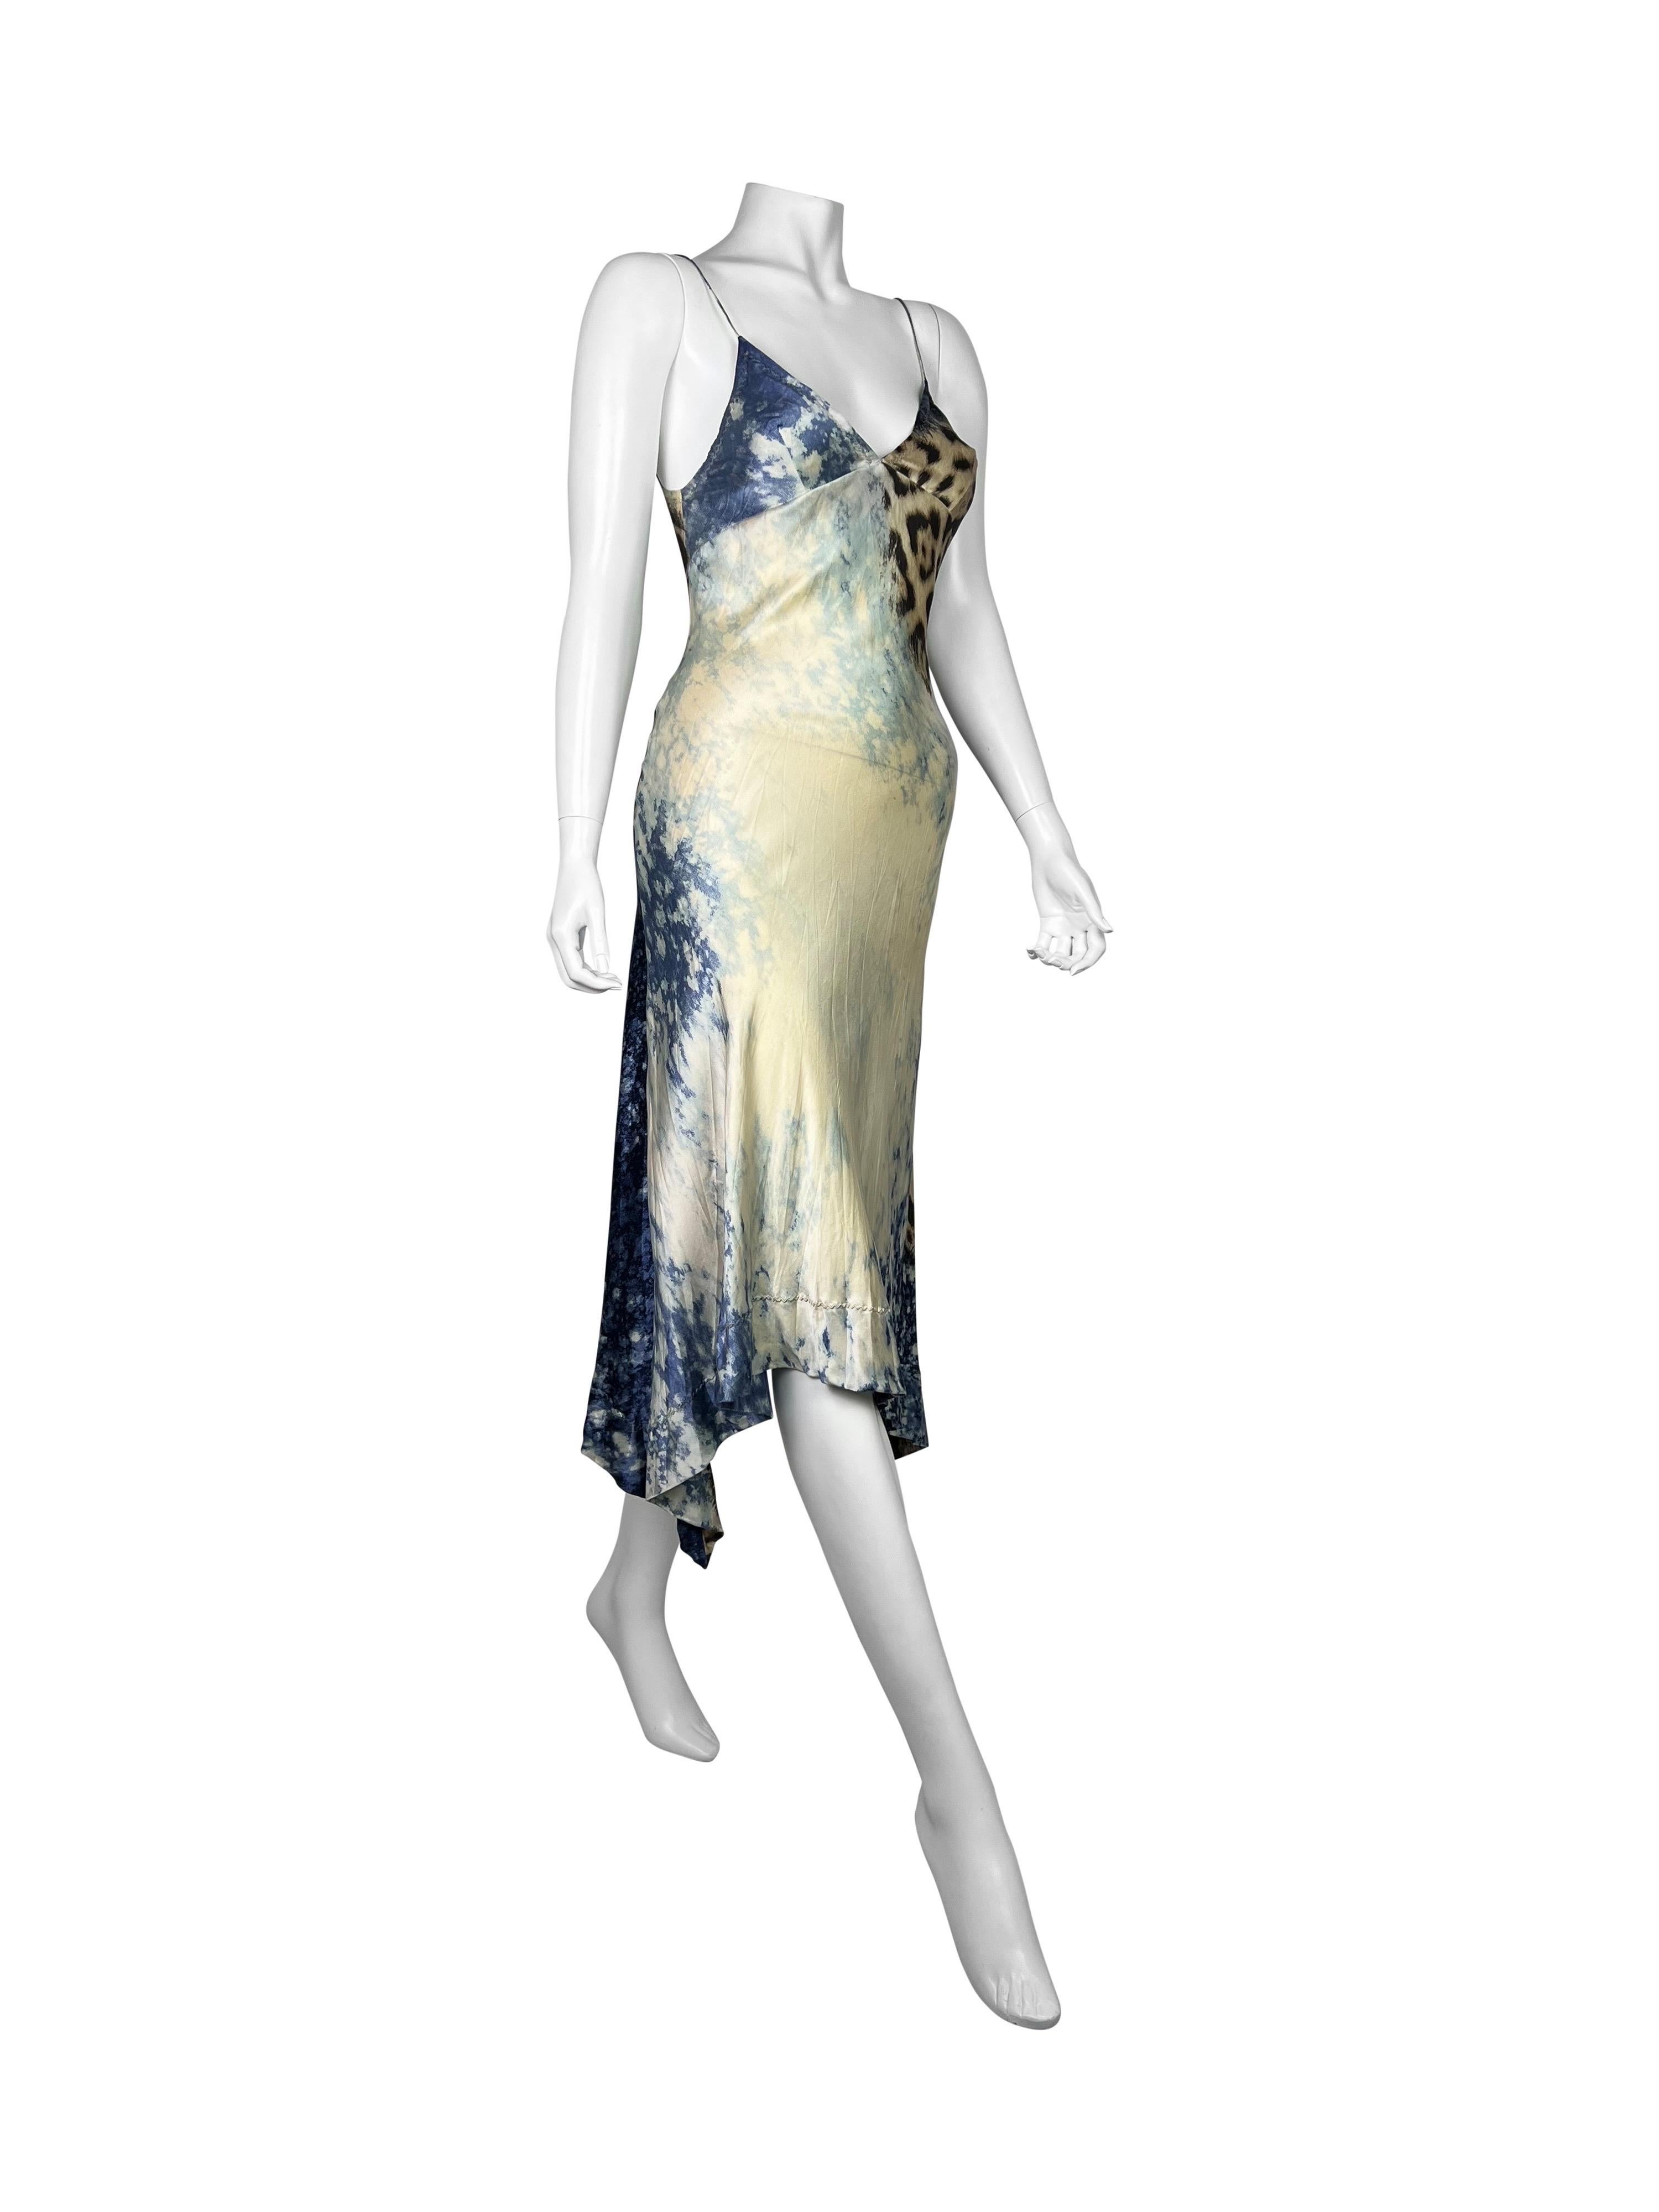 A stunning midi-length crinkled silk dress printed to imitate ti-dye denim and leopard. 

Size XS.

Measurements (flat on one side):

- Armpit to armpit - 42 cm (16,5 in)

- Waist - 37-41 cm (14,5-16 in)

- Hips - up to 55 cm (21,5 in)

- Length -